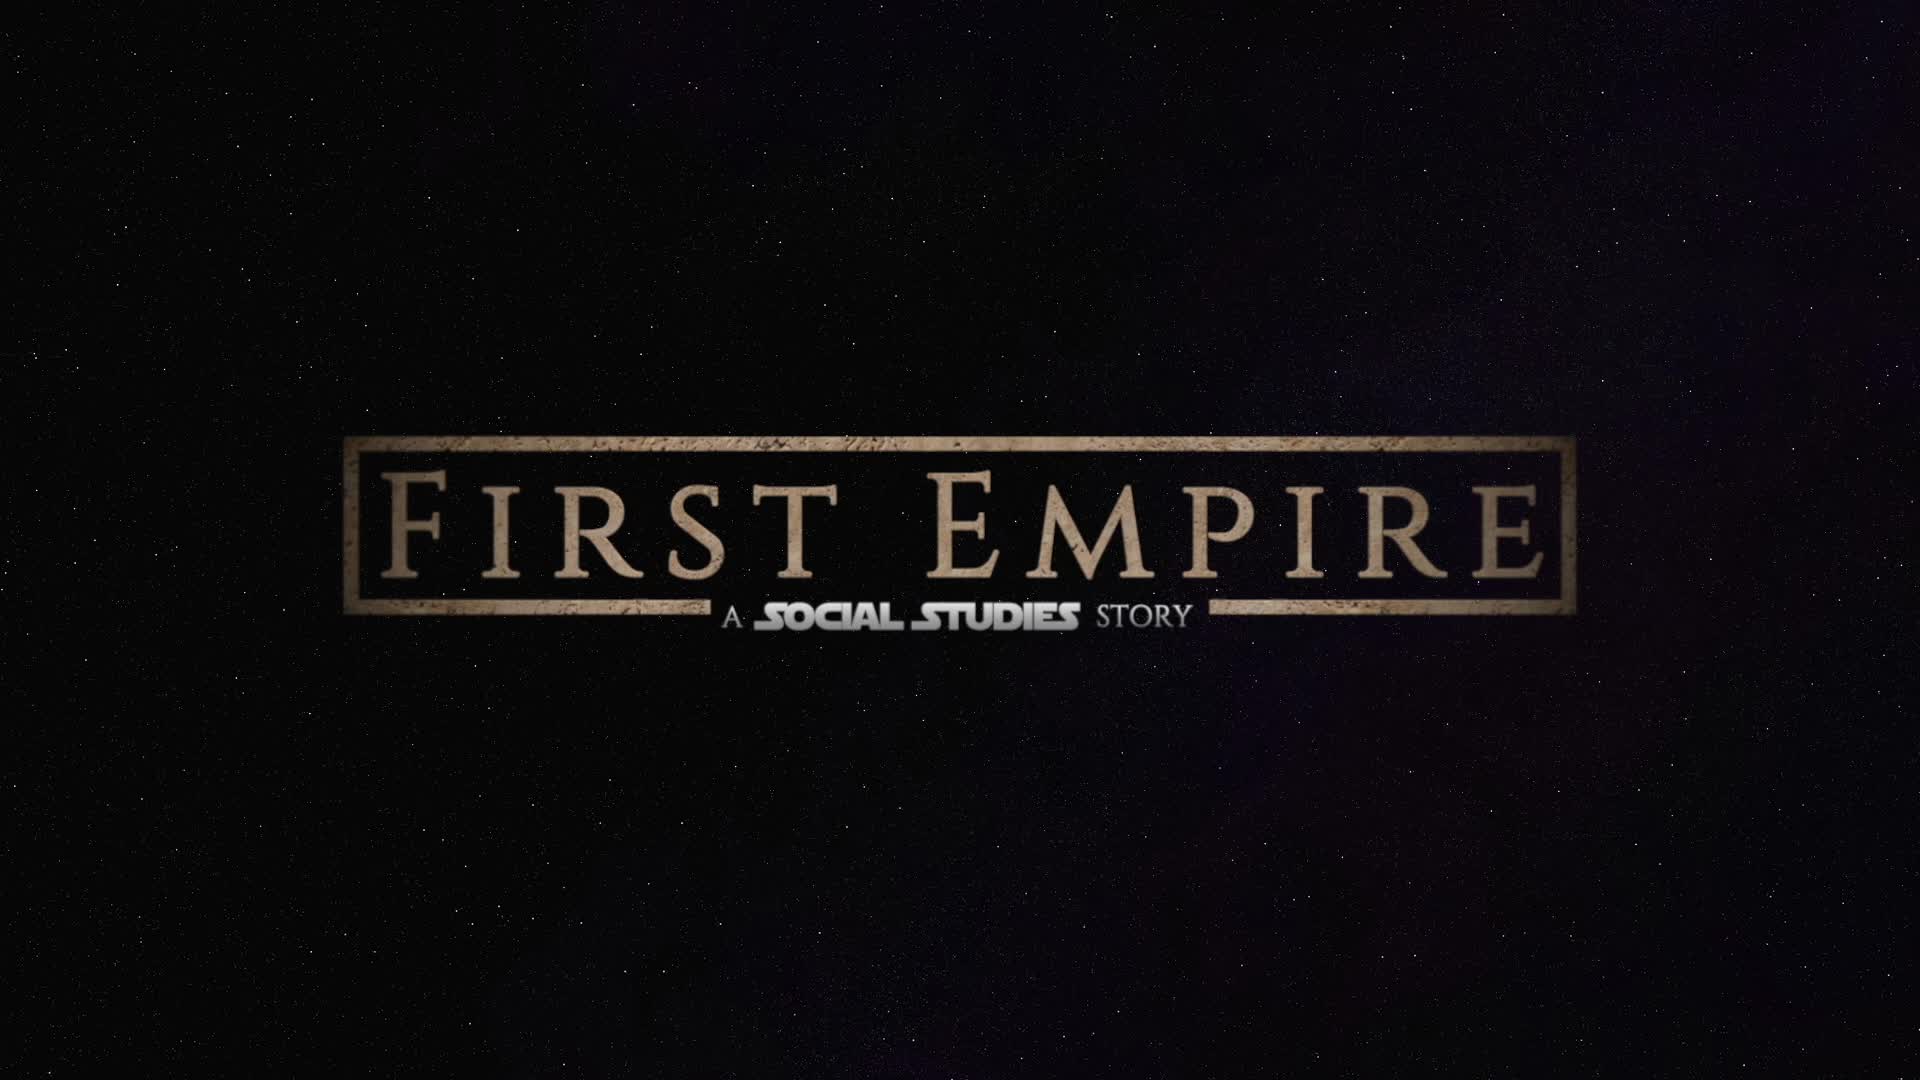 The First Empire